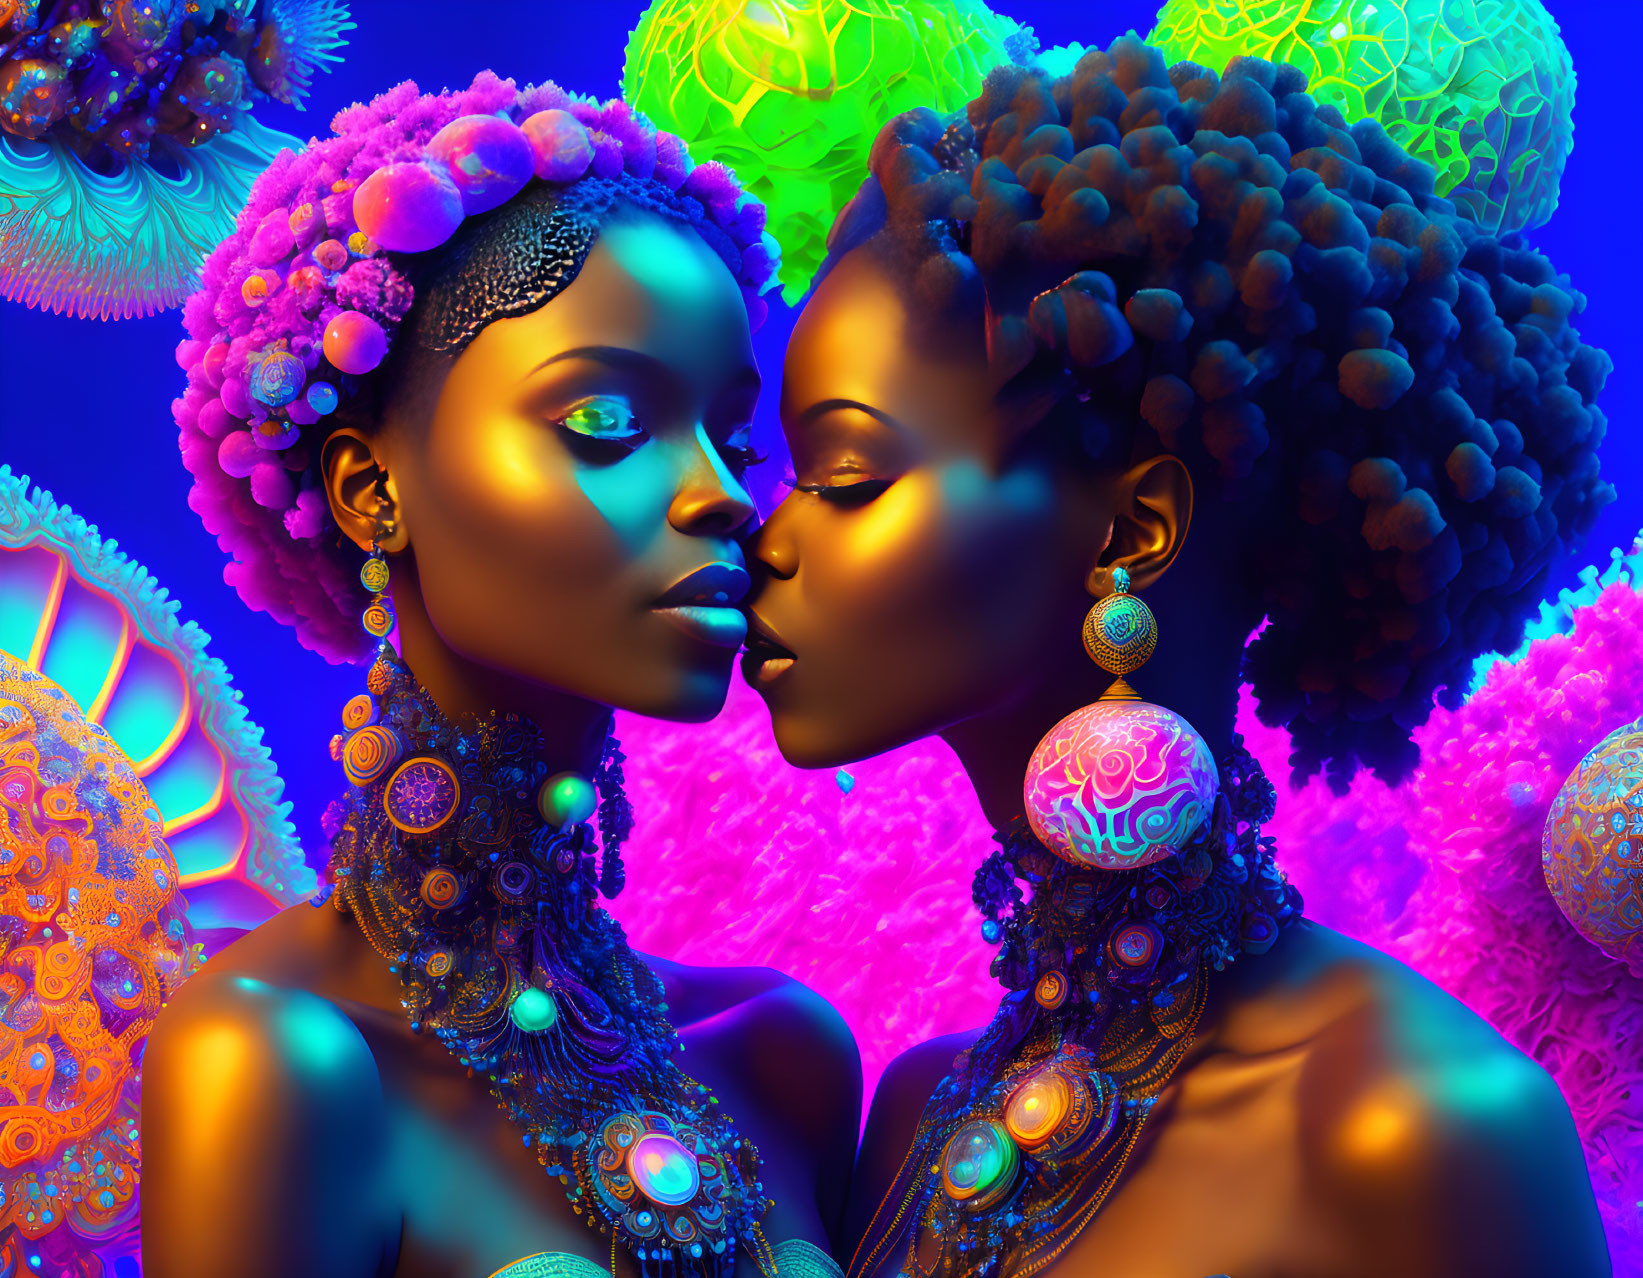 Sensual African Coral Nymphs embrace